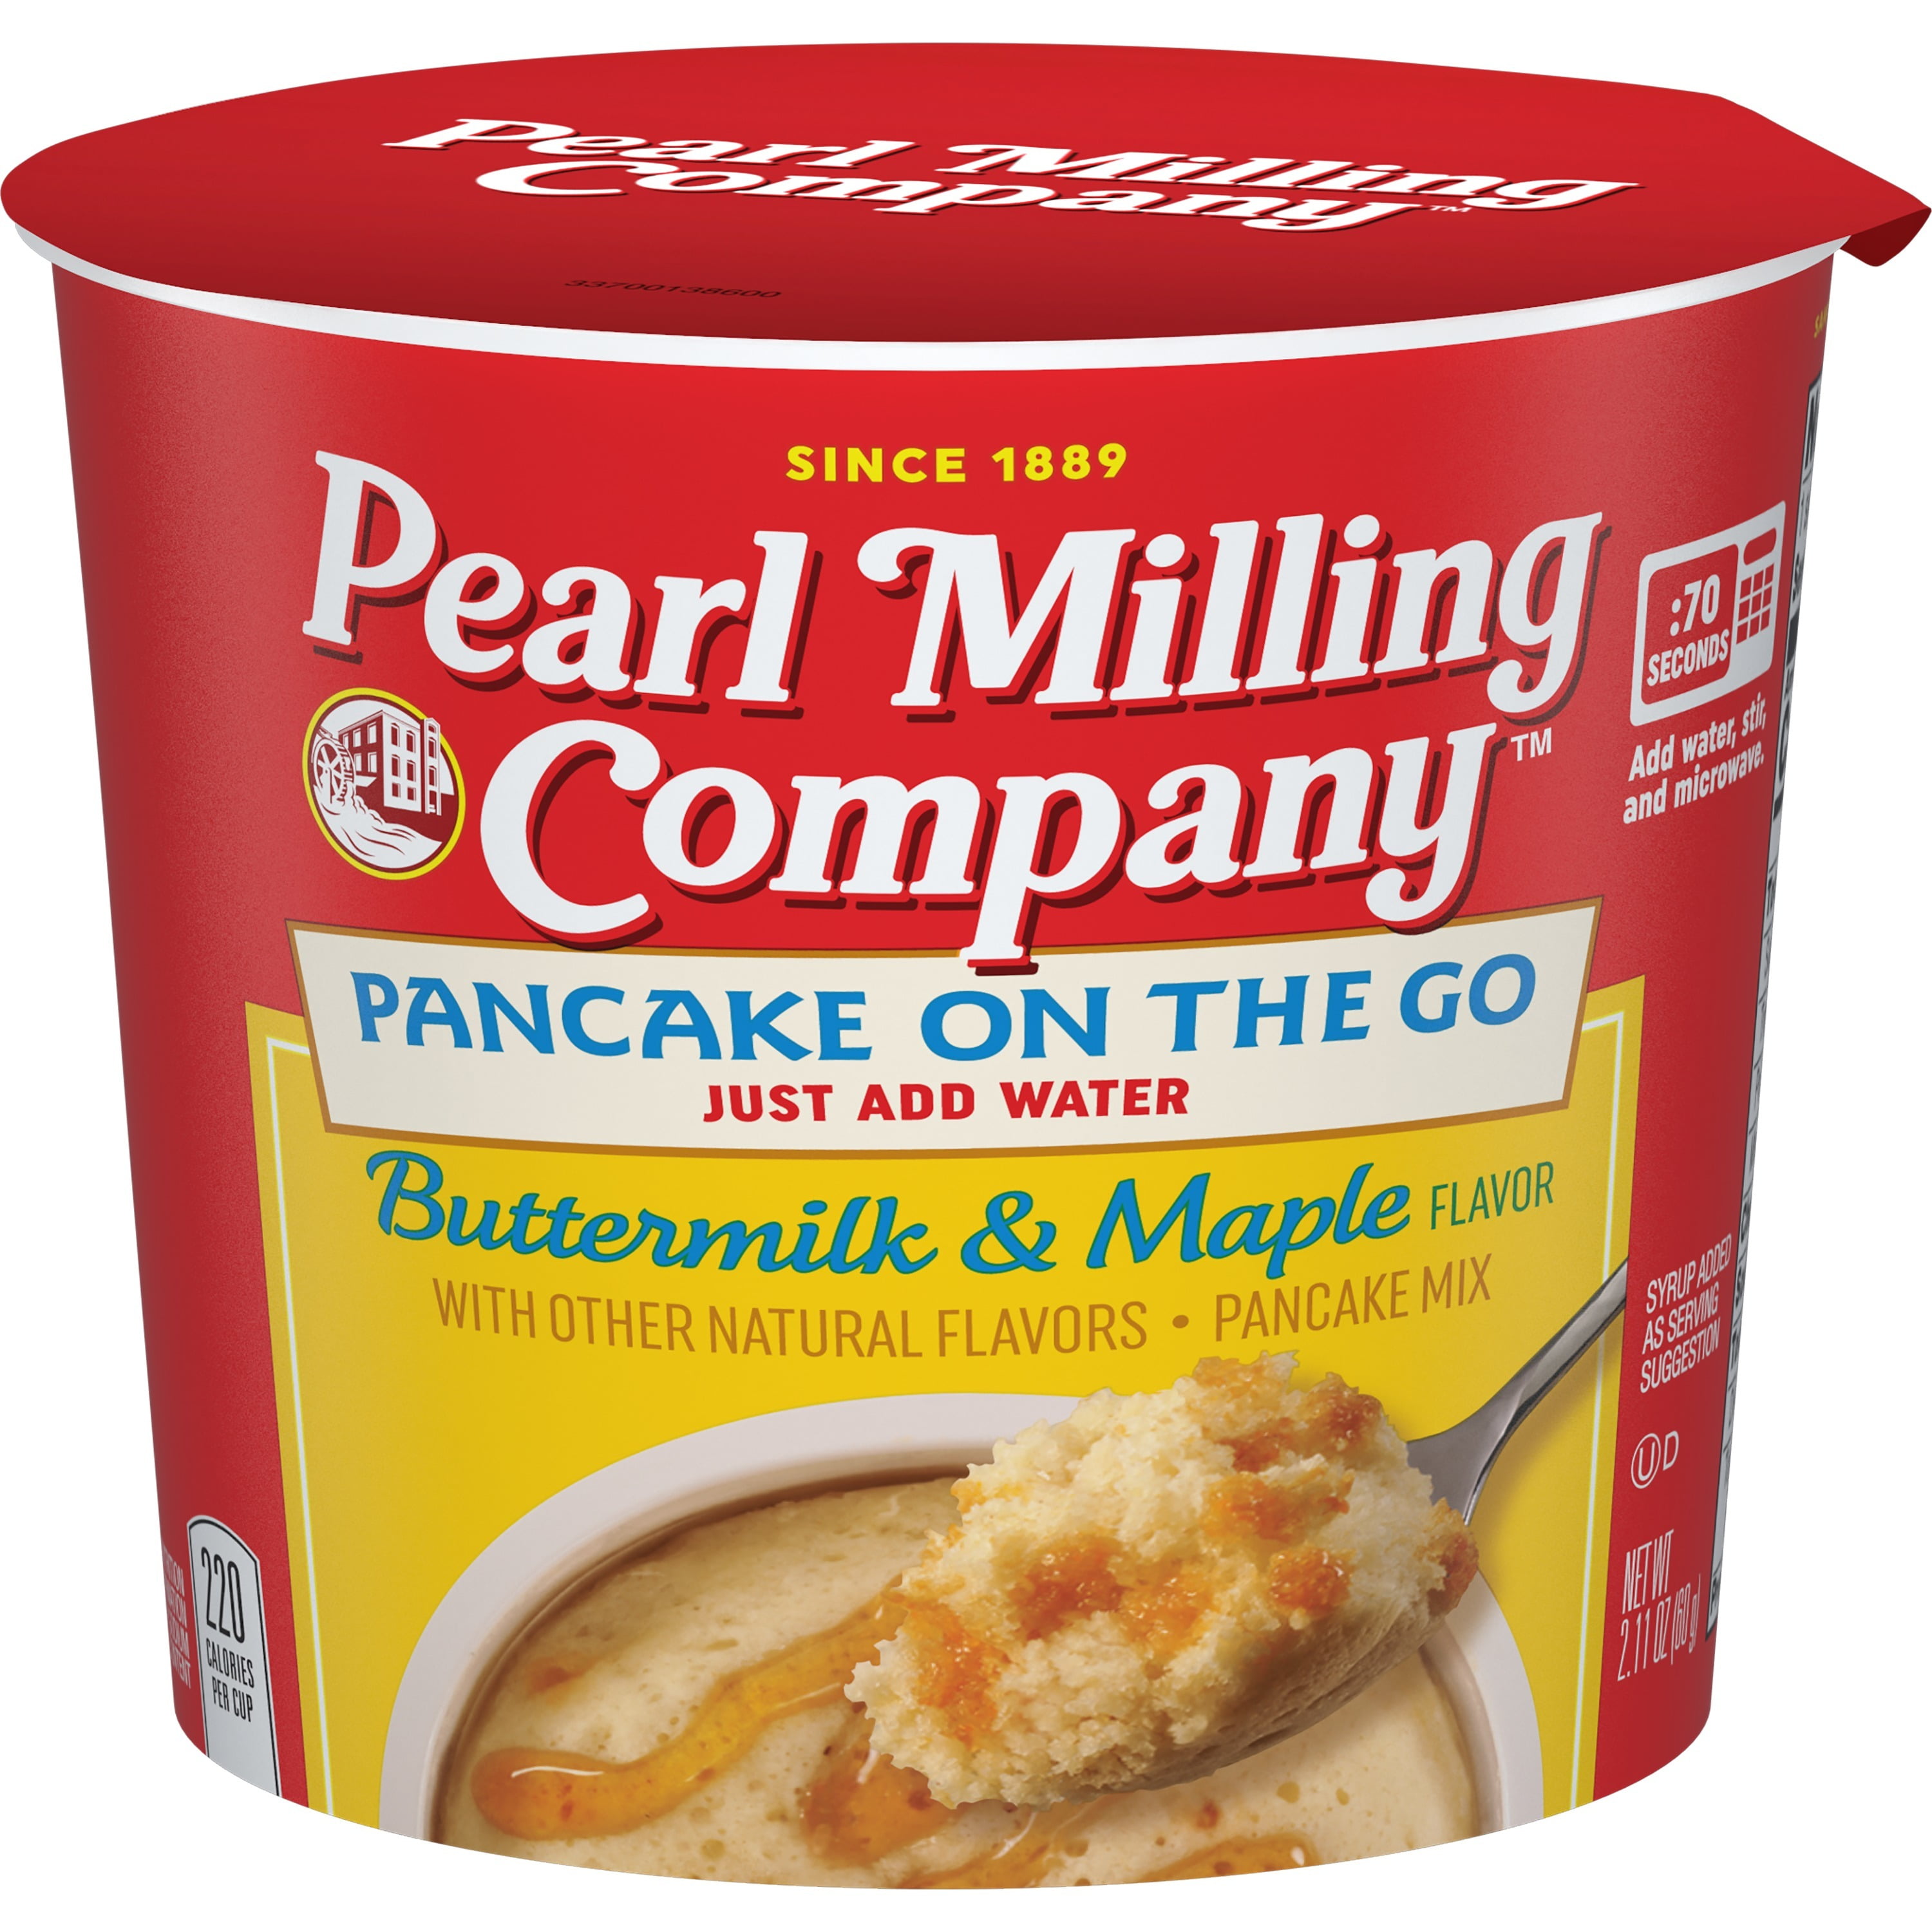 Pearl Milling Company Pancake On The Go Pancake Mix Buttermilk & Maple Flavor 2.11 Oz